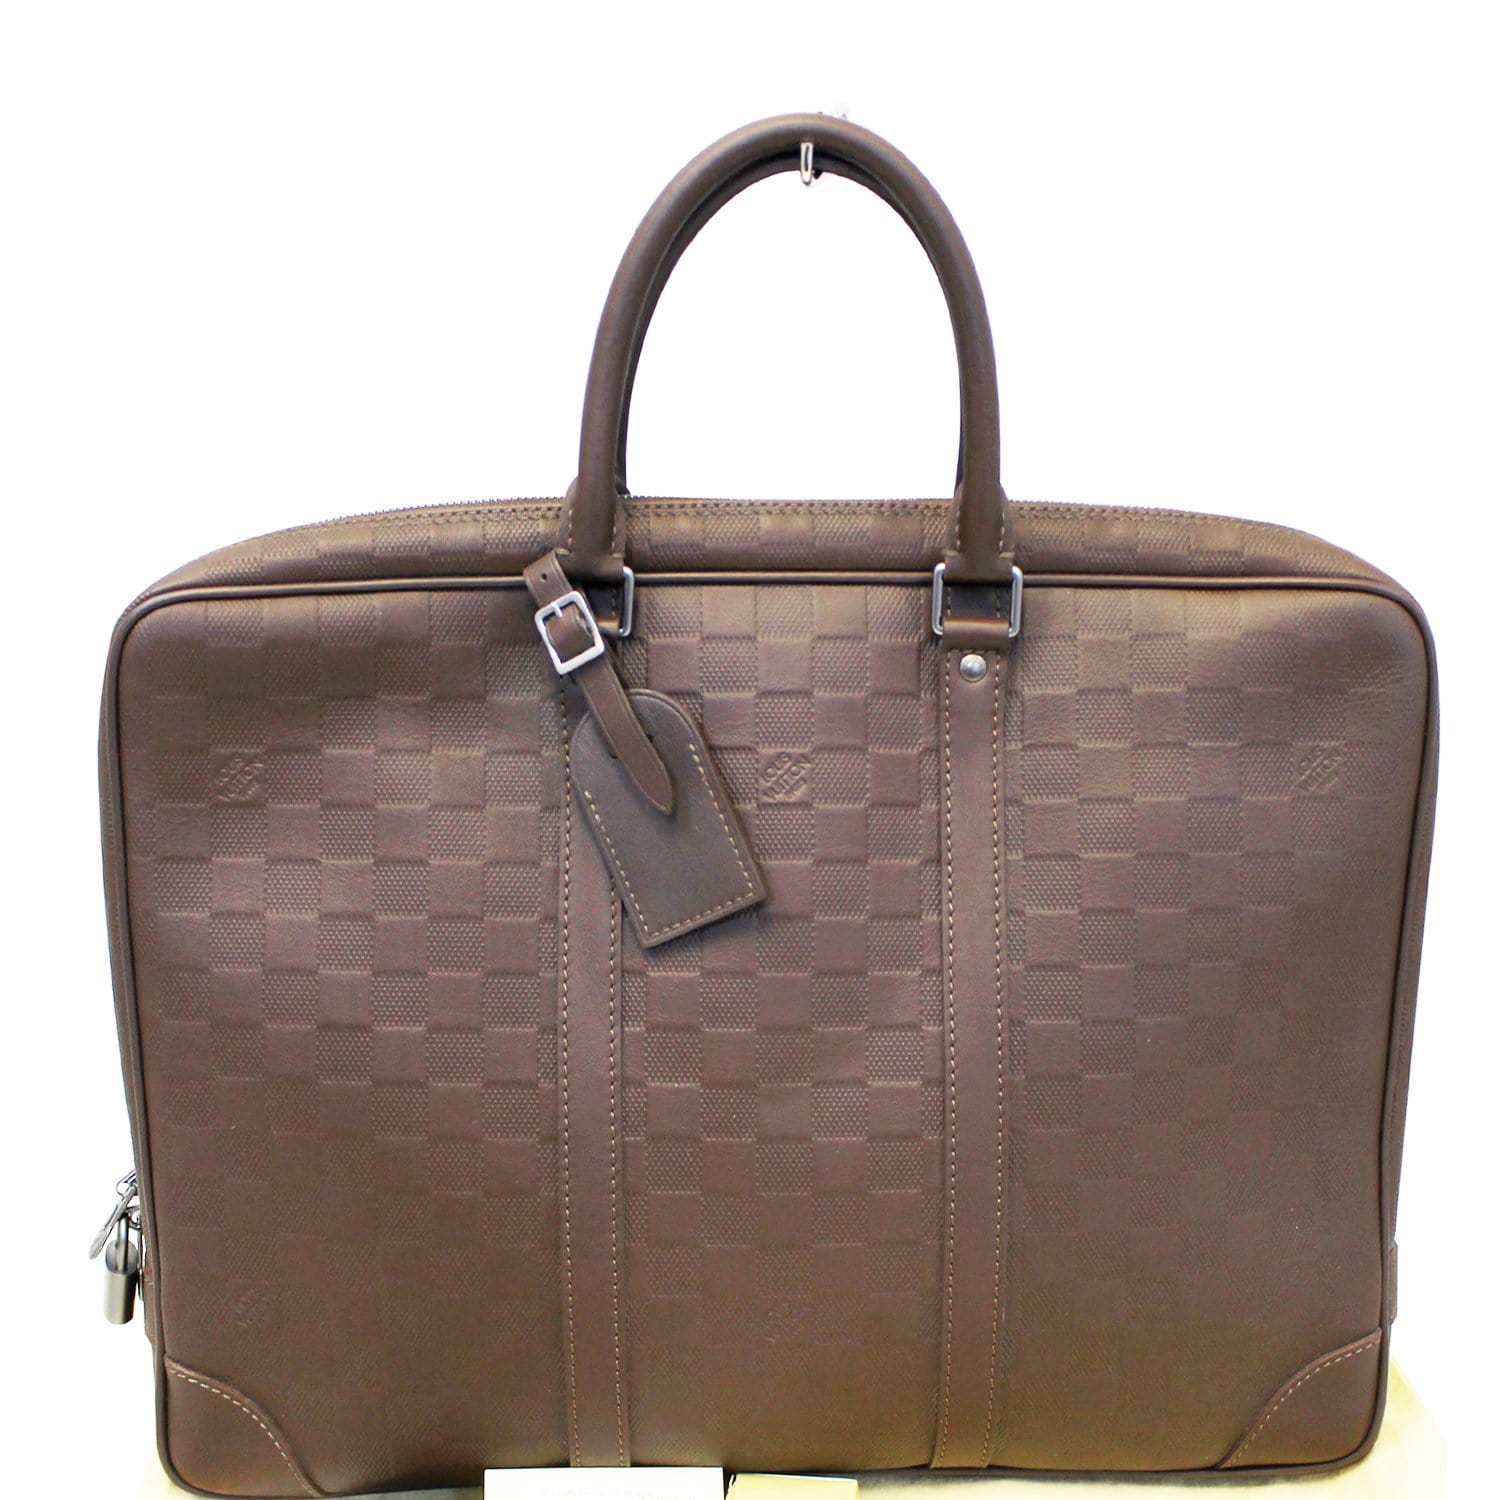 Porte-Documents Voyage PM Briefcase Damier Infini Leather - Bags